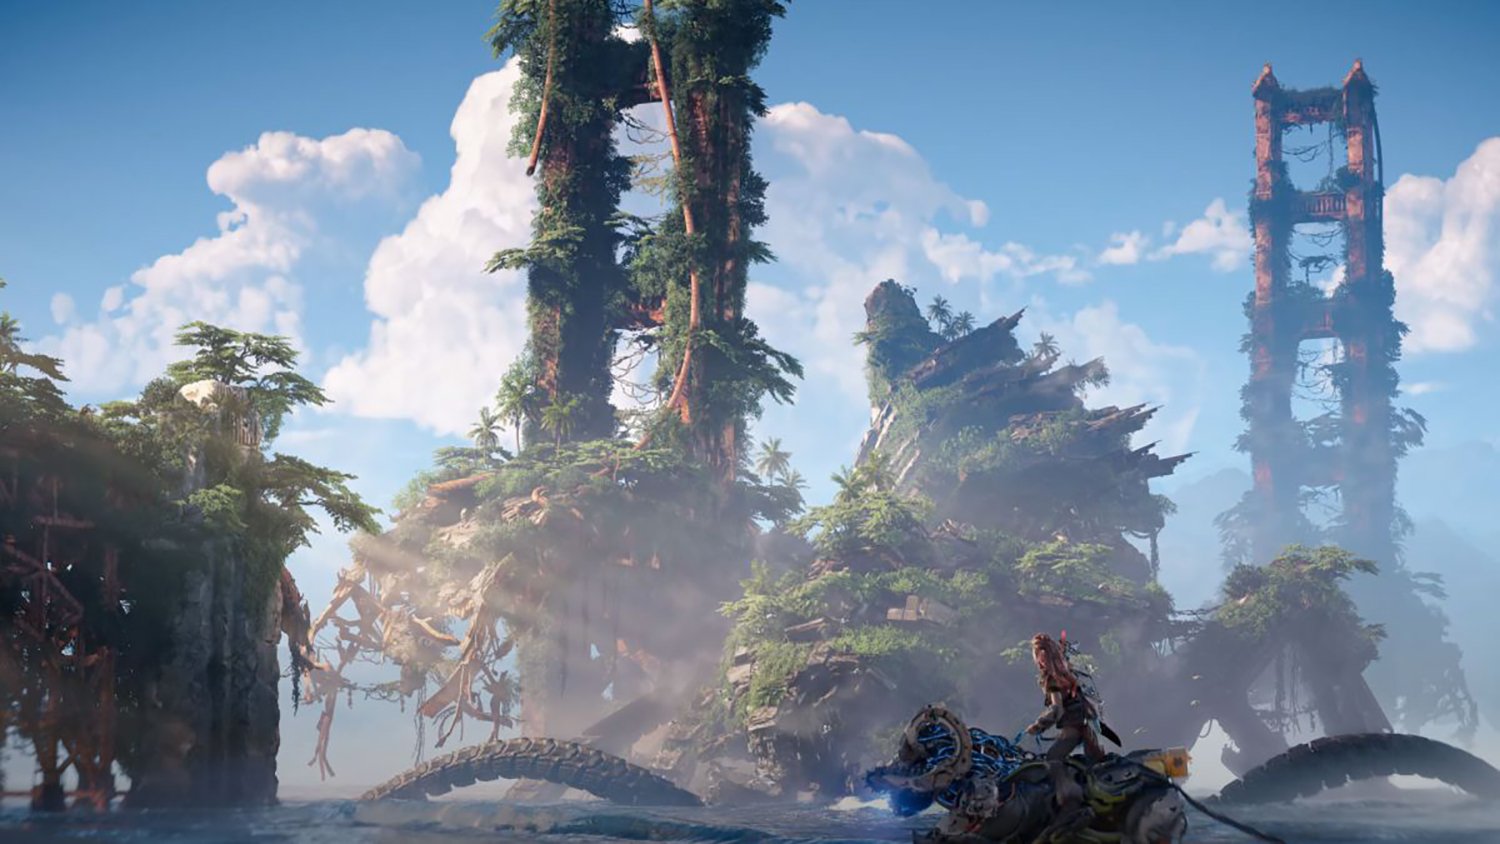 Aloy rides a horse past a cityscape in Horizon Forbidden West, which is one of several games getting TV shows